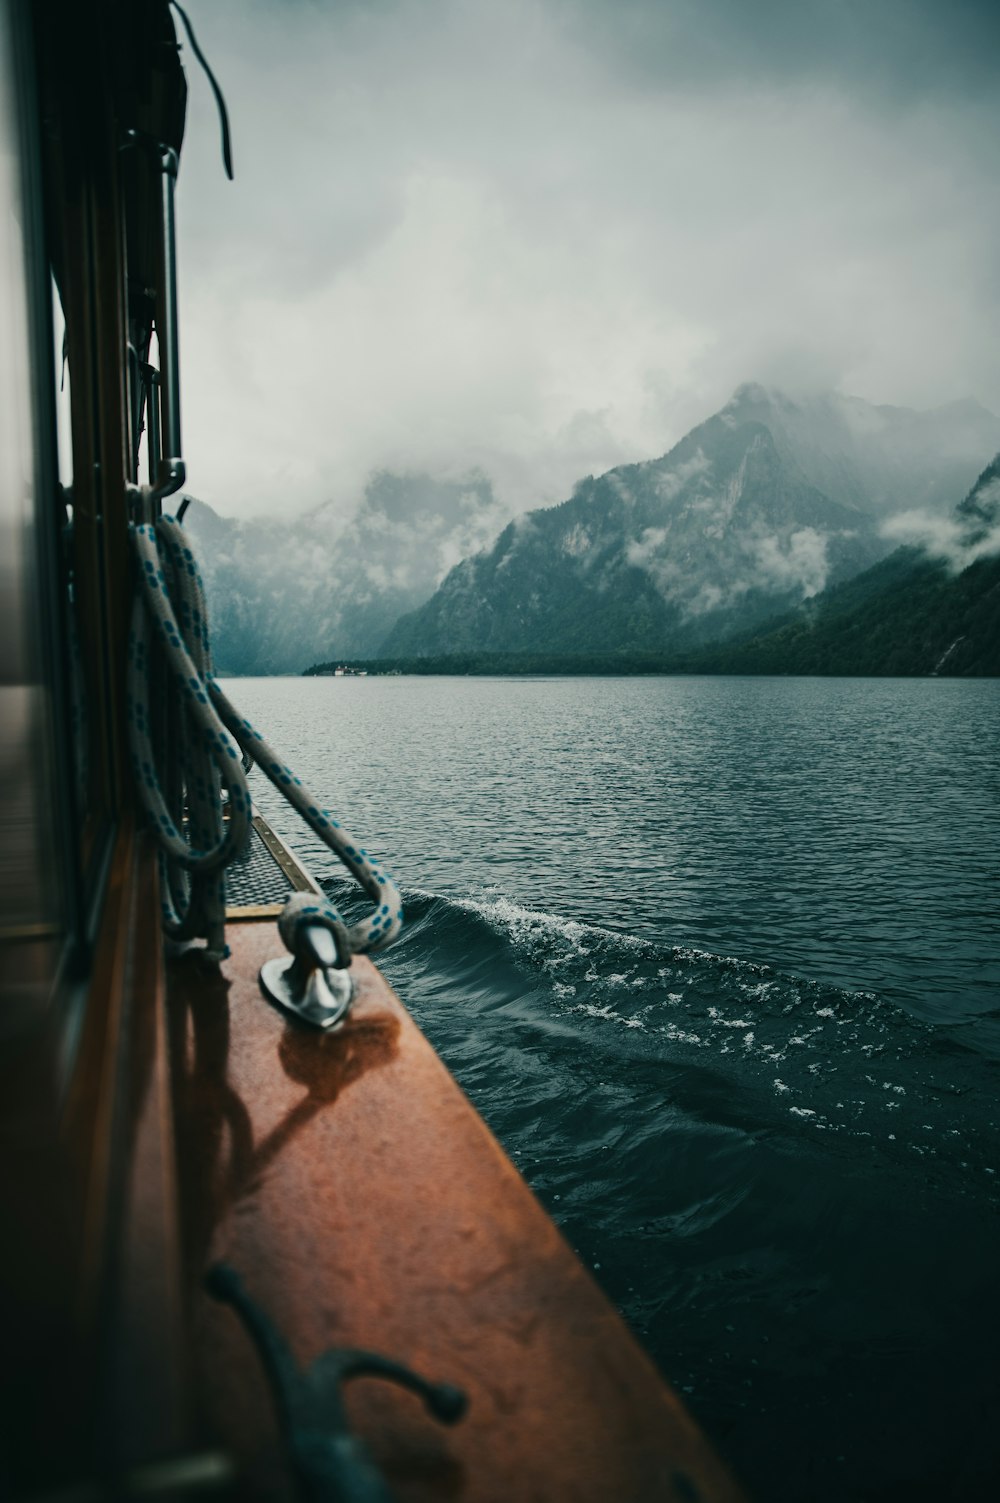 a boat traveling on a body of water with mountains in the background